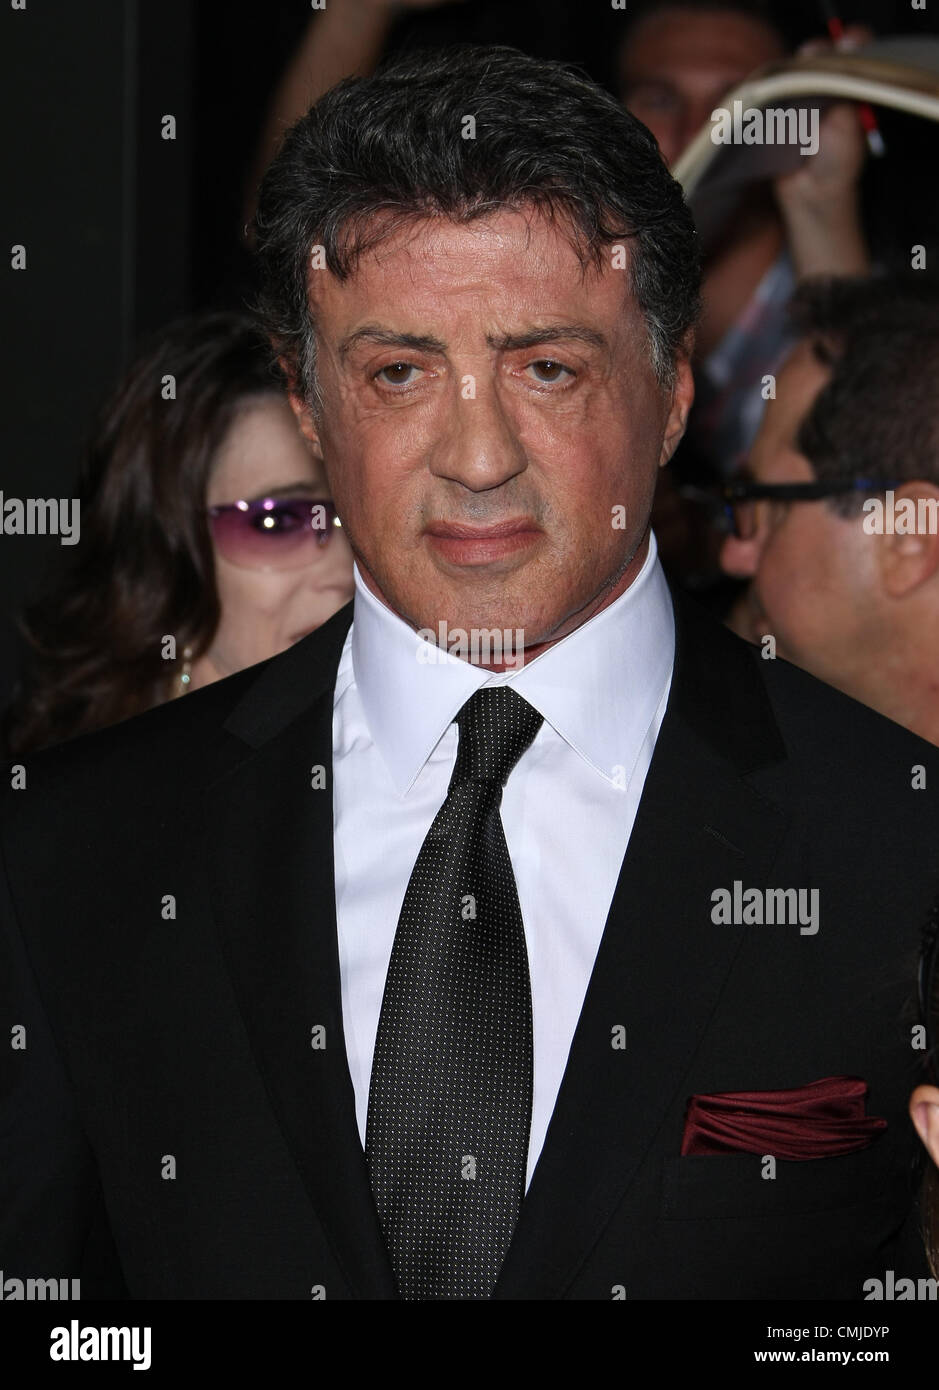 SYLVESTER STALLONE EXPENDABLES 2. WORLD PREMIERE HOLLYWOOD LOS ANGELES CALIFORNIA USA 15 August 2012 Stock Photo